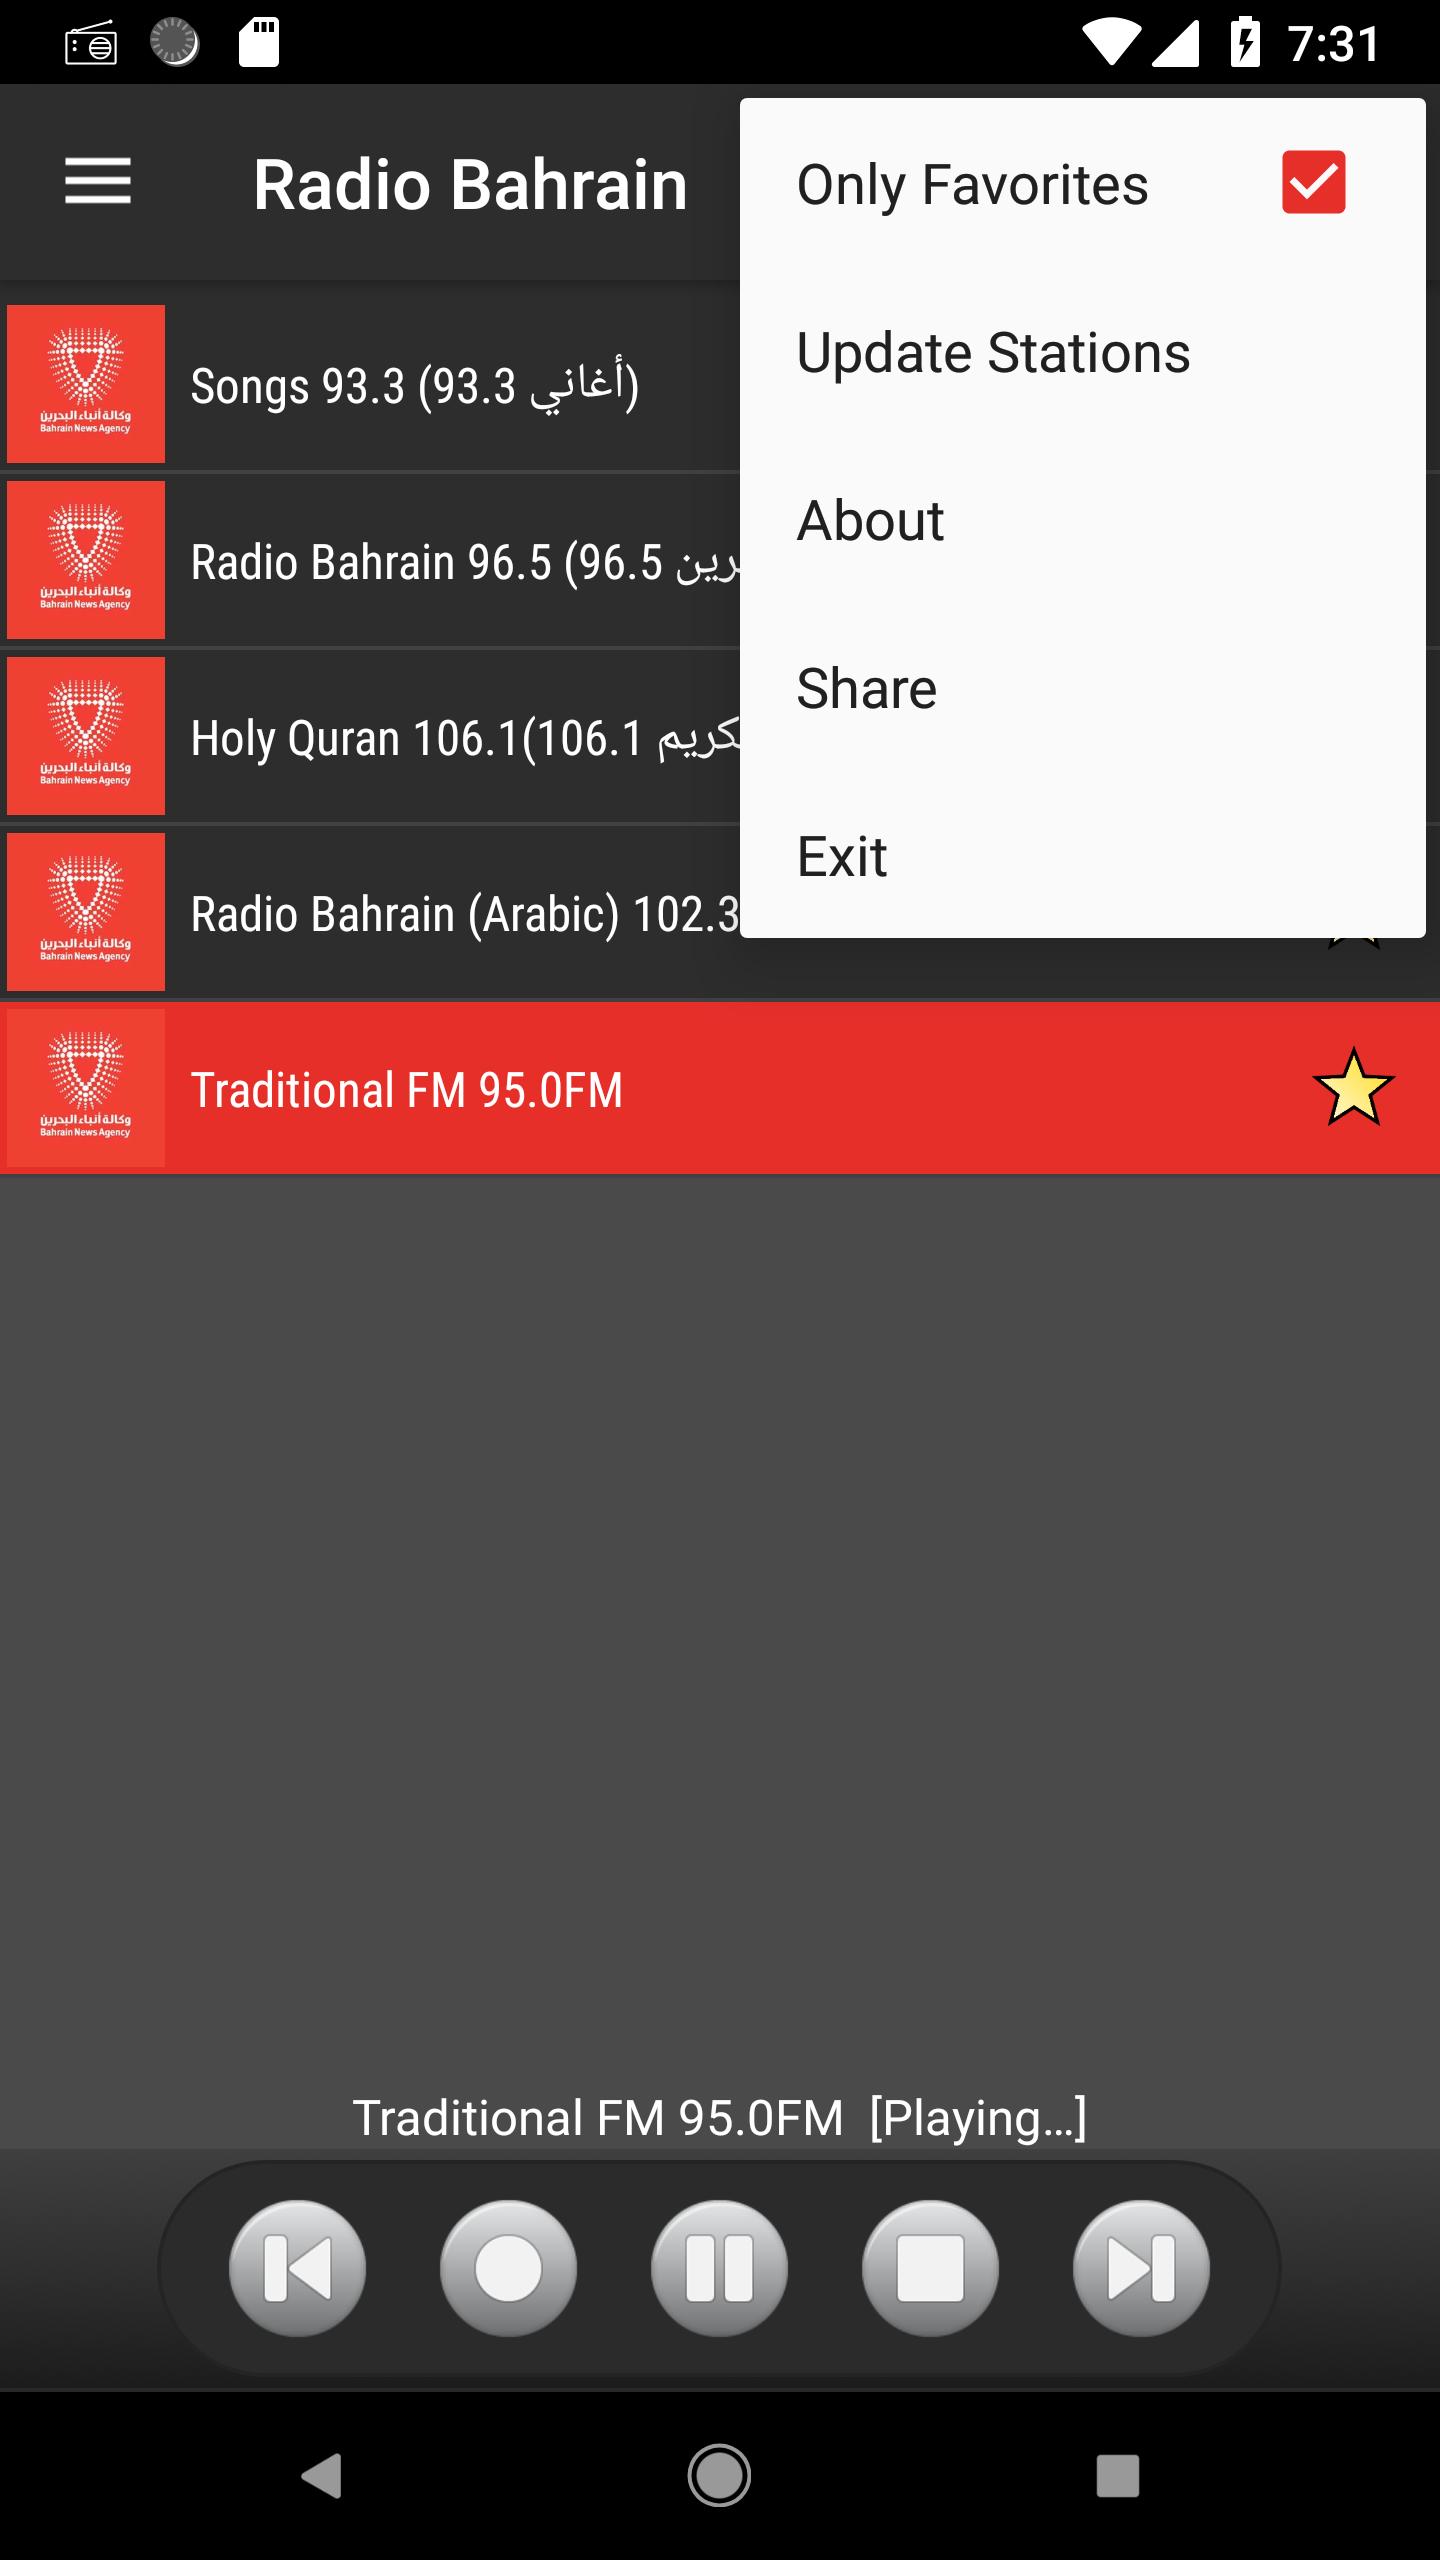 RADIO BAHRAIN for Android - APK Download